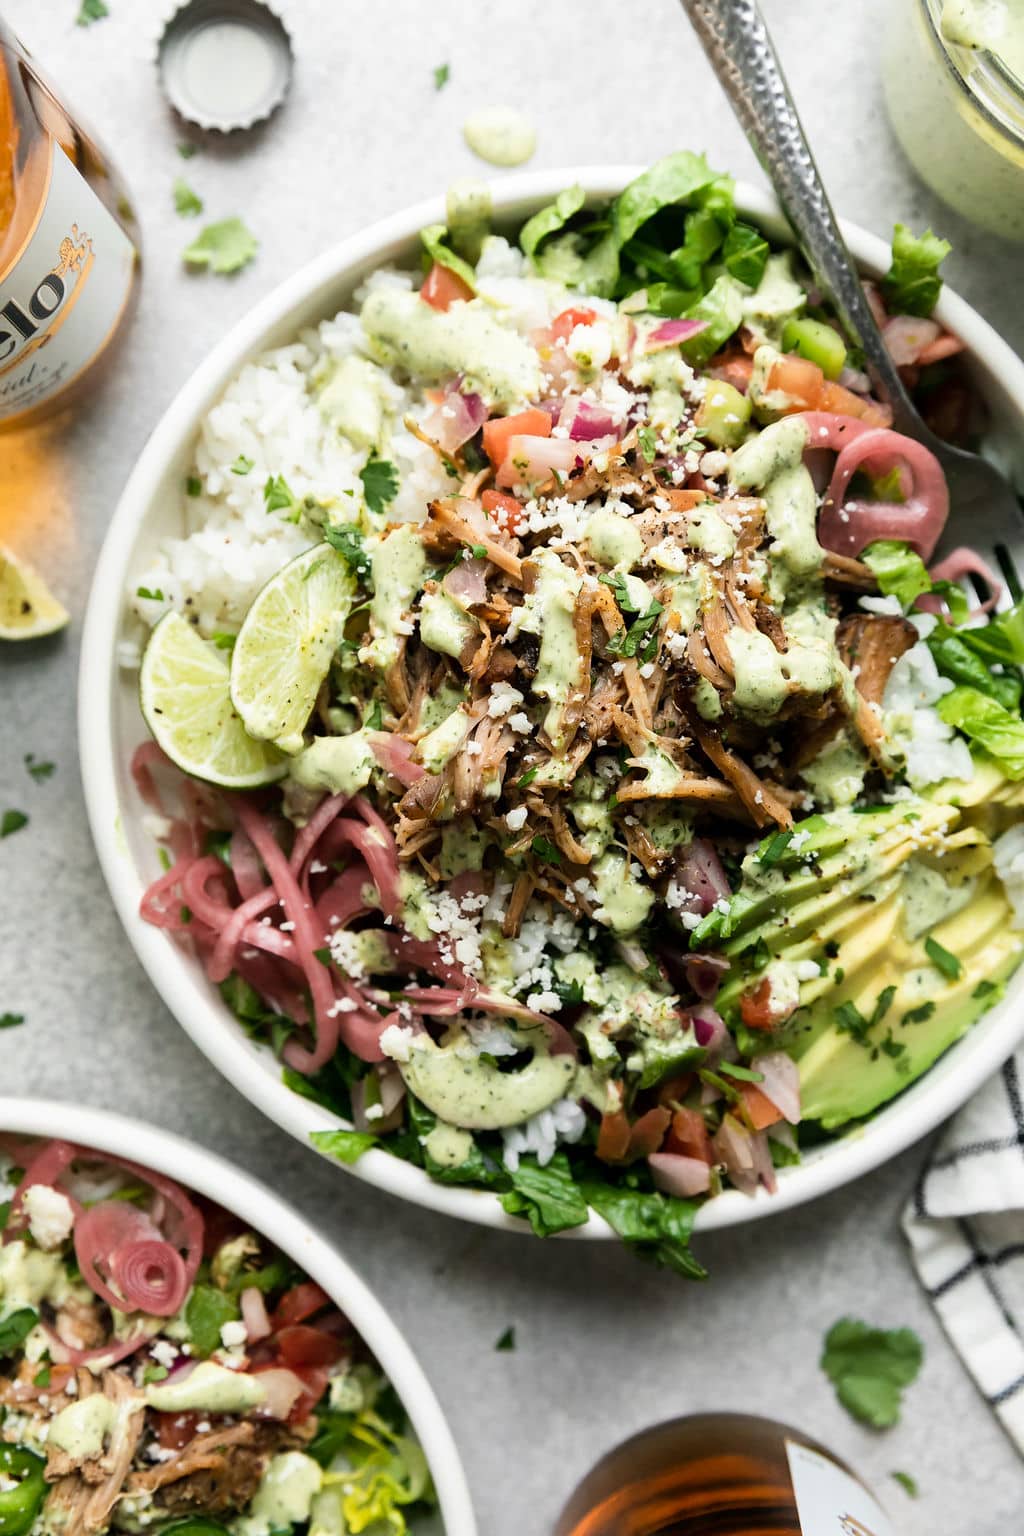 https://therealfooddietitians.com/wp-content/uploads/2019/08/Slow-Cooker-Carnitas_8.jpg